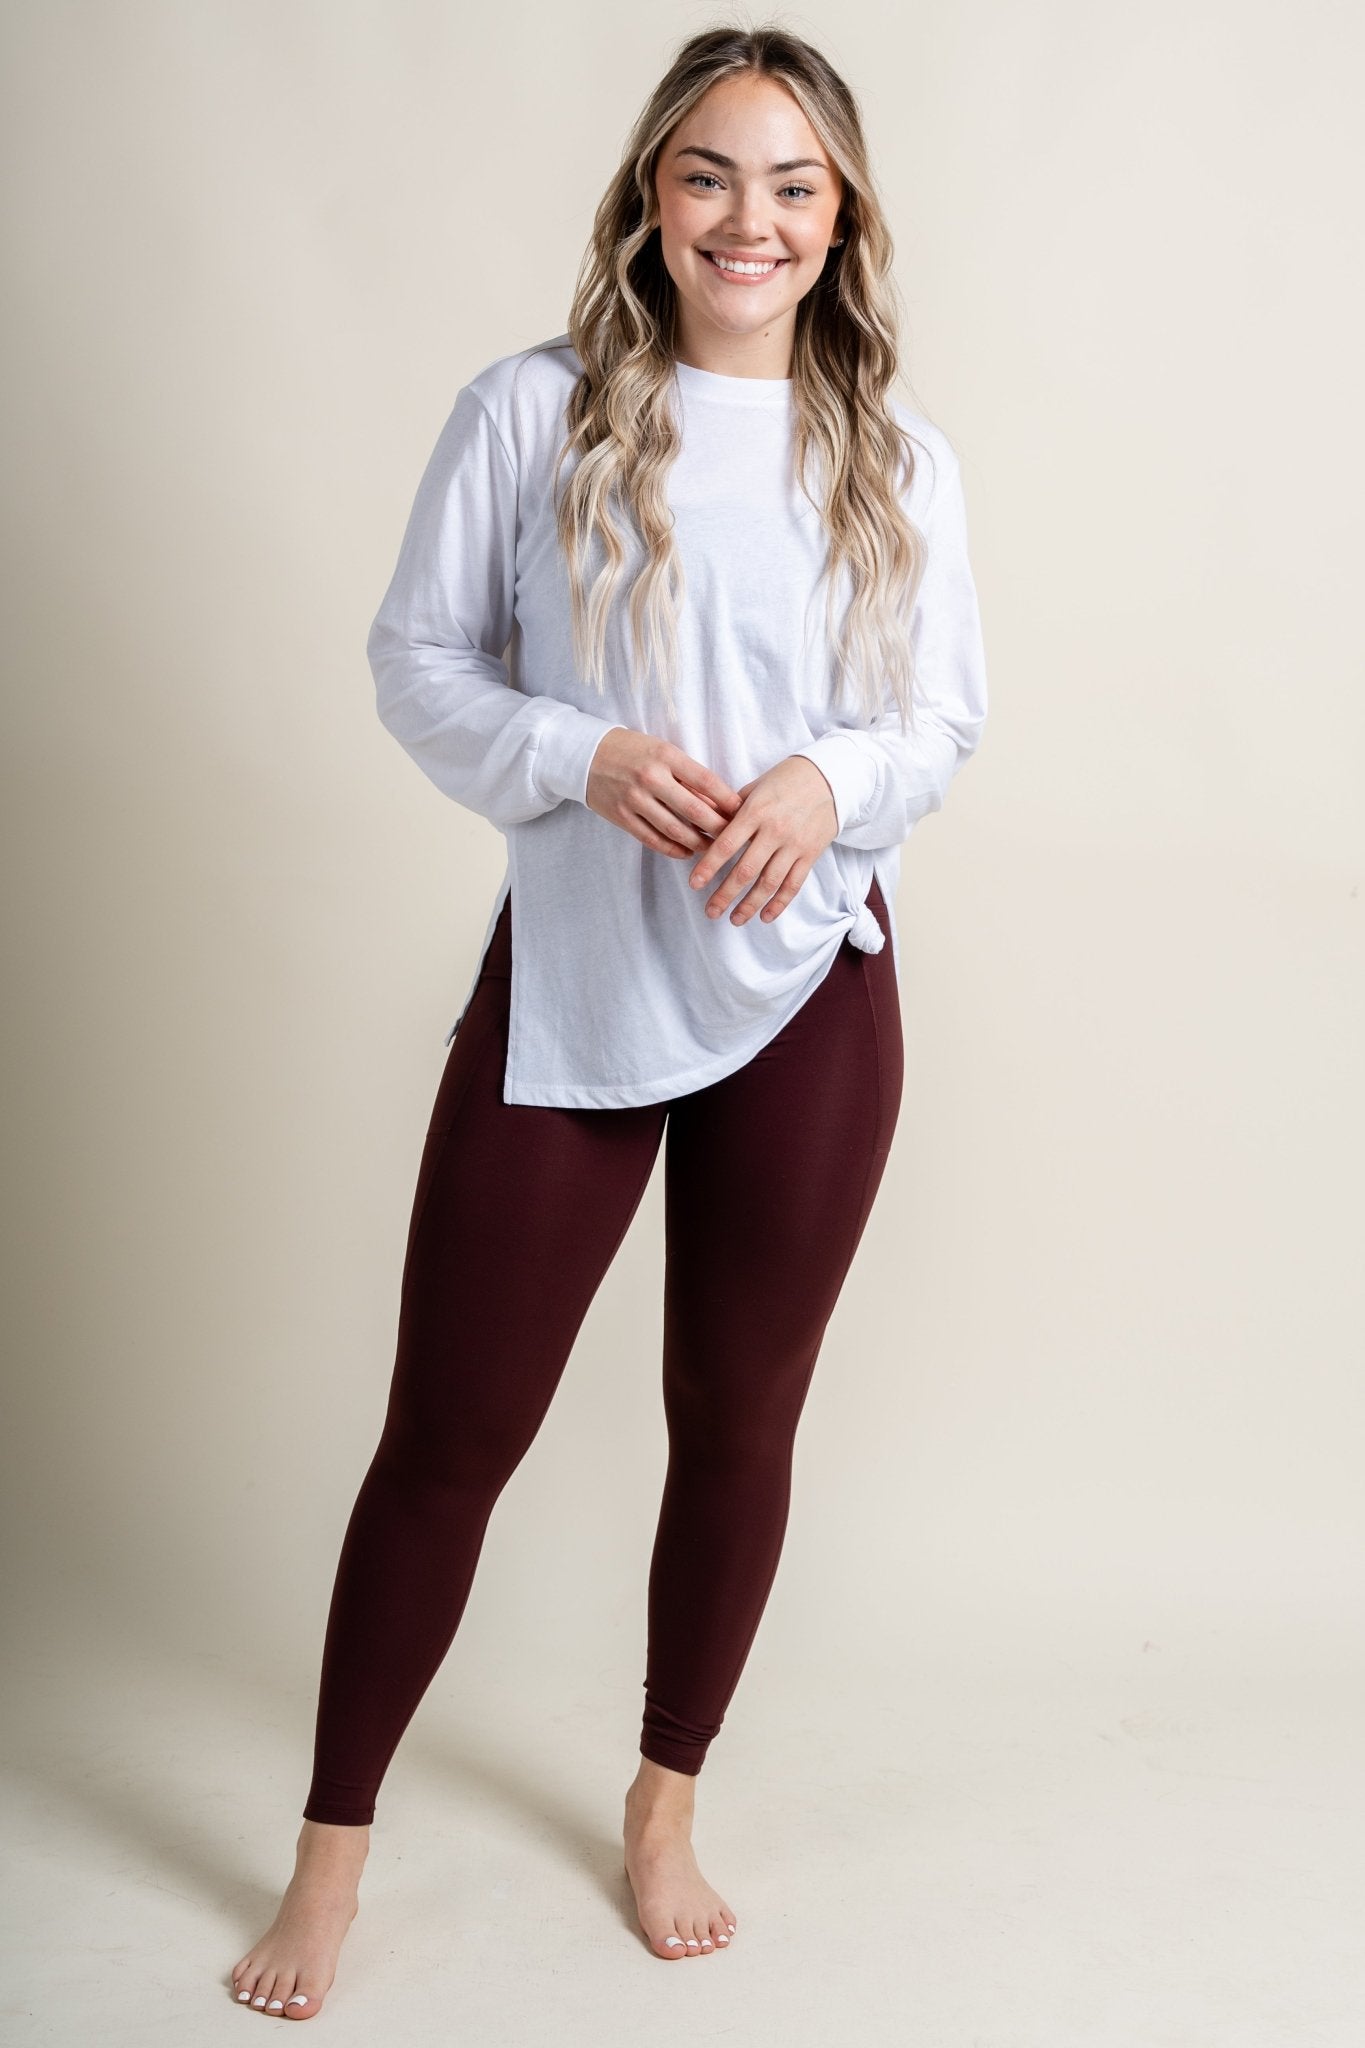 Z Supply cool down long sleeve top white - Z Supply tank top - Z Supply Tees & Tanks at Lush Fashion Lounge Trendy Boutique Oklahoma City